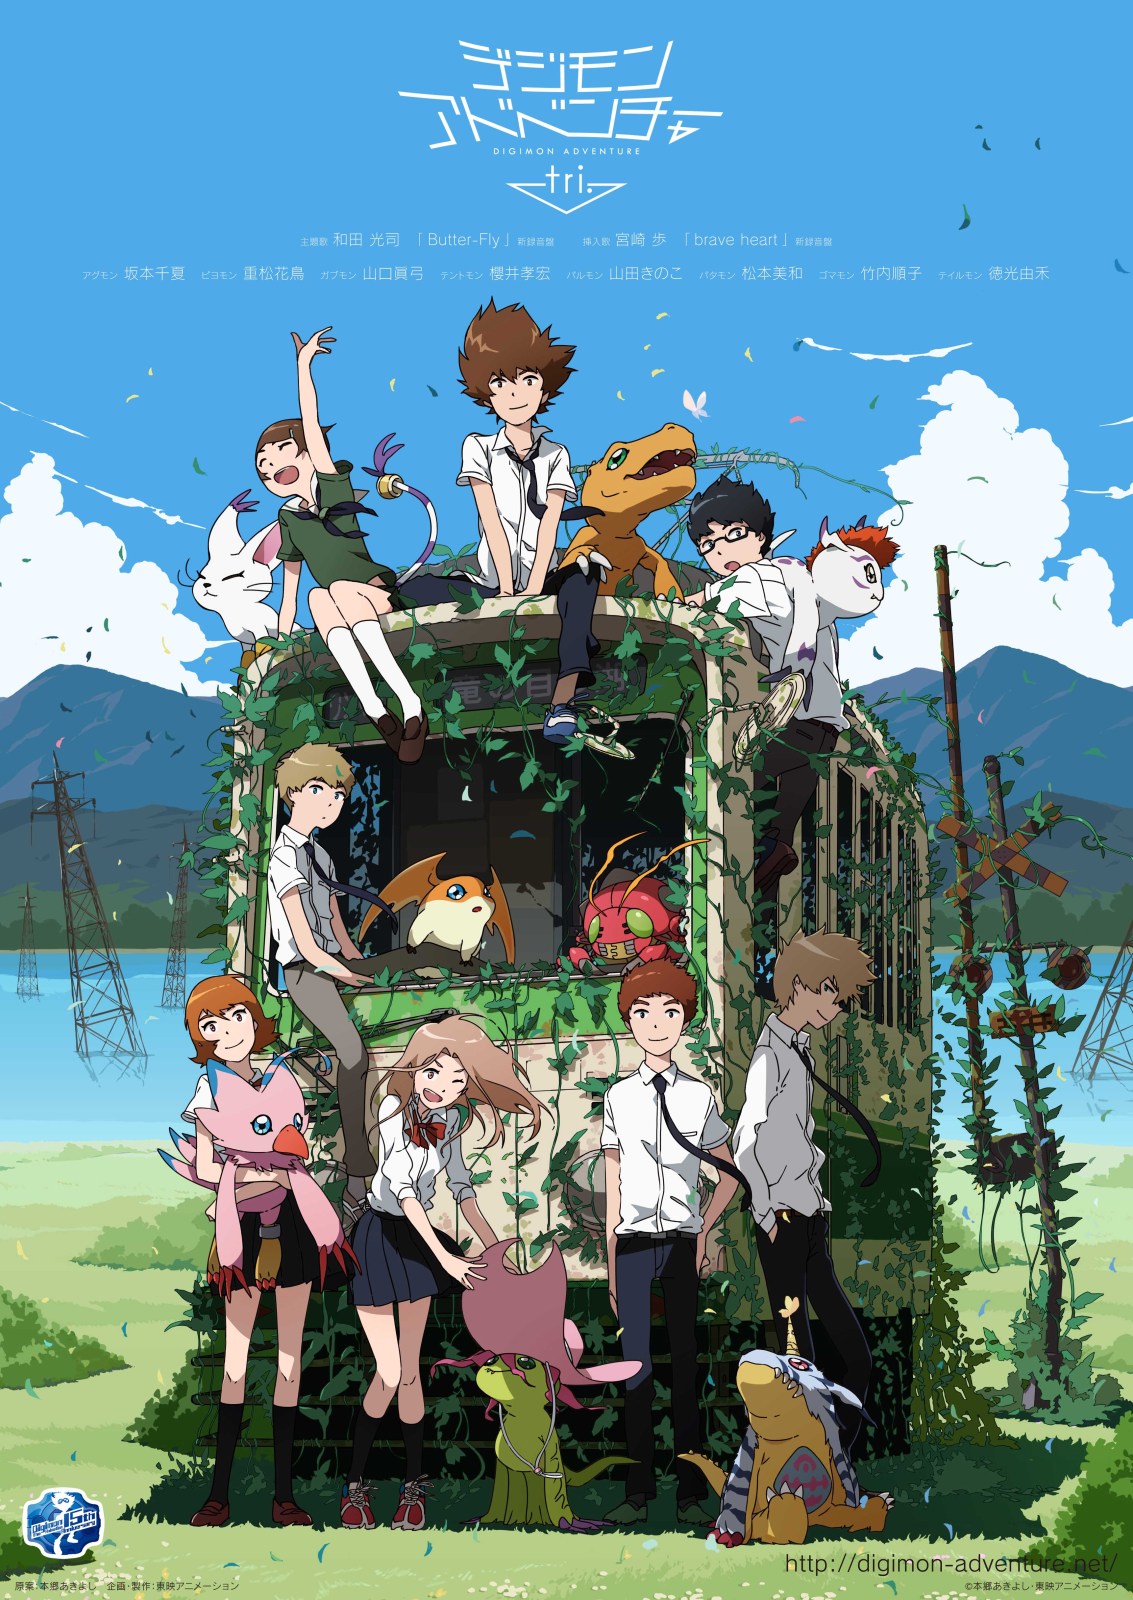 Digimon Adventure Tri To Be Six Part Theatrical Anime